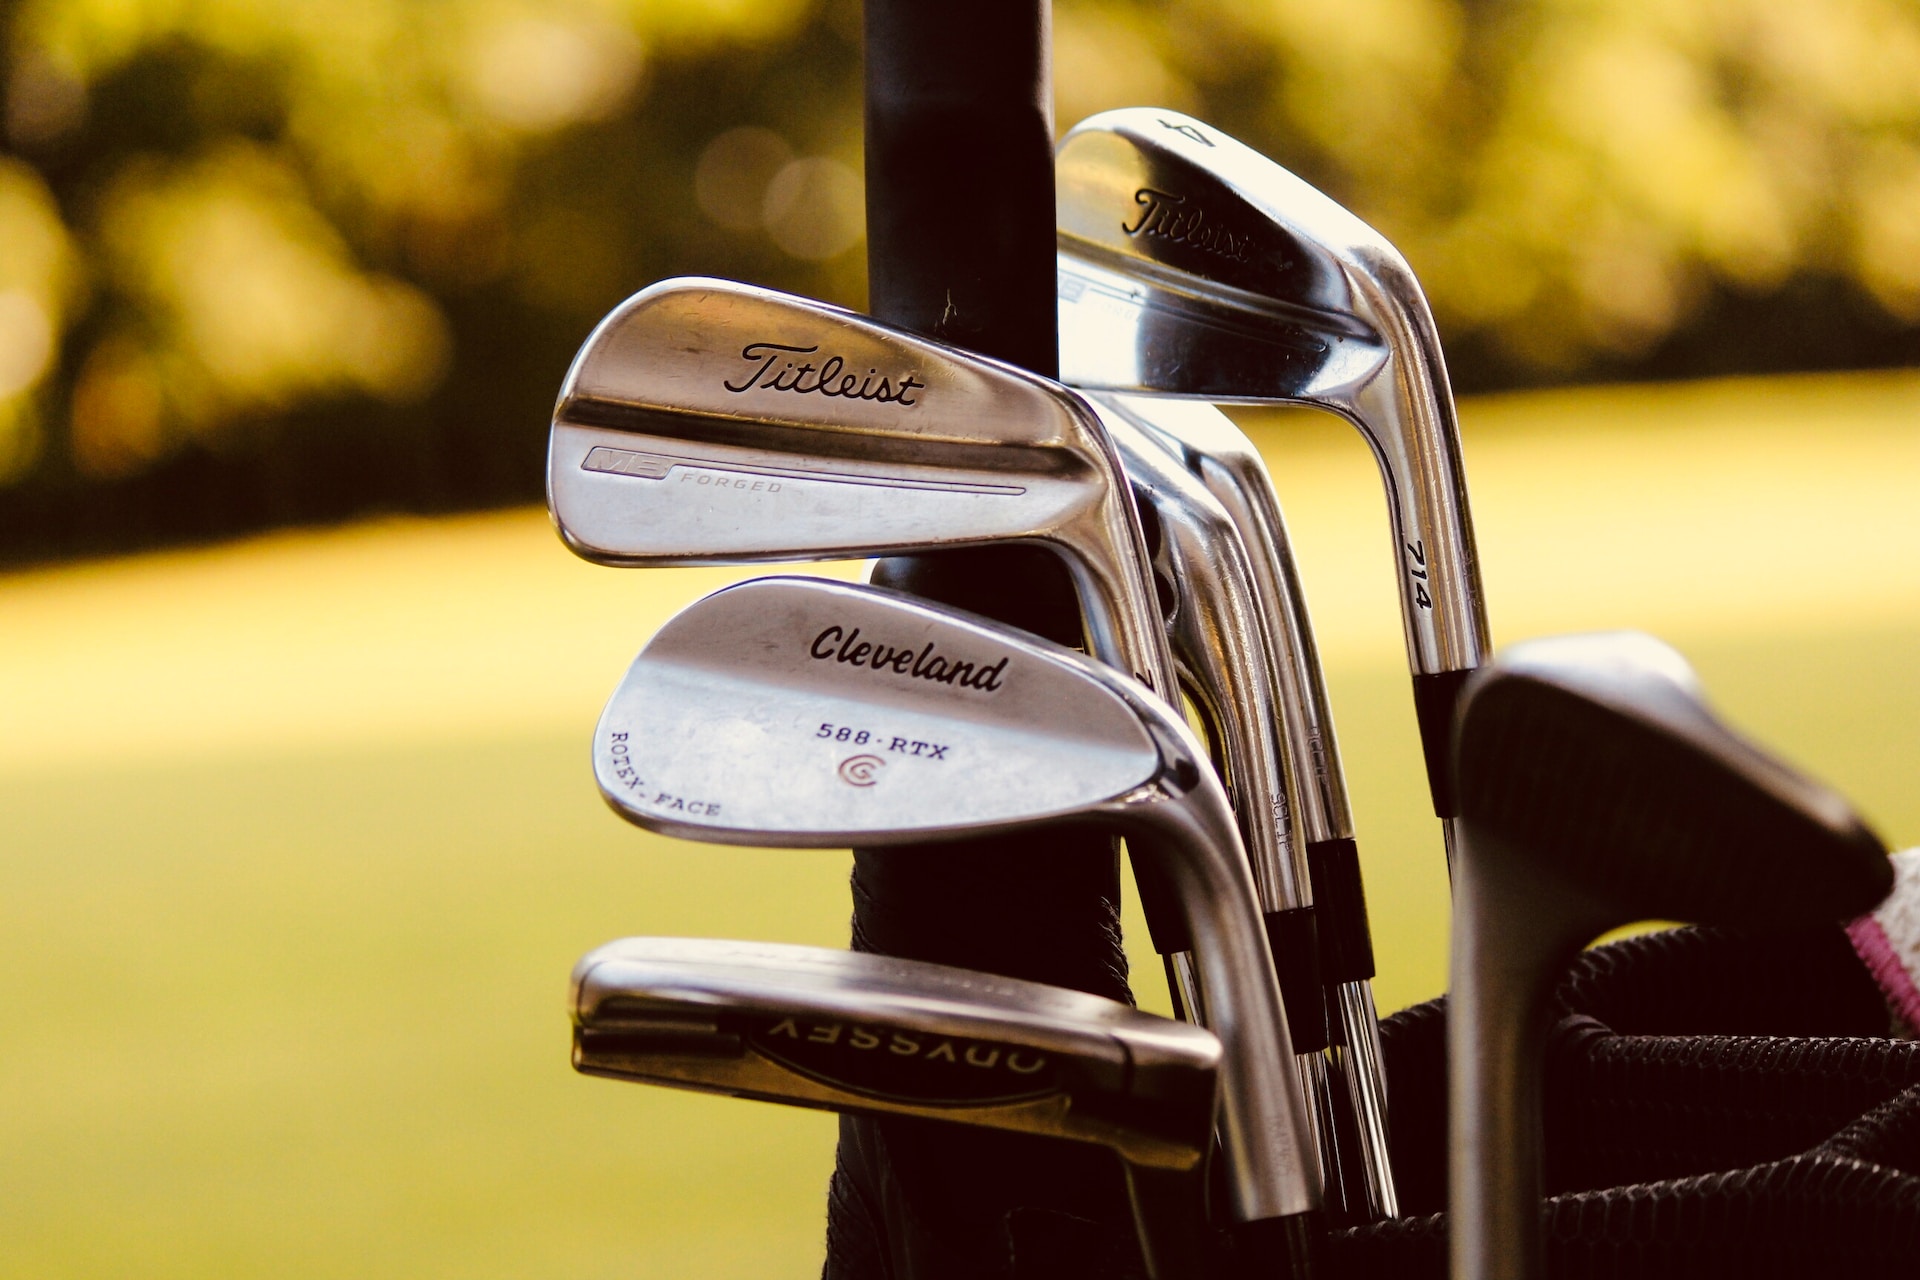 The Best Women’s Golf Clubs for Beginners in 2023